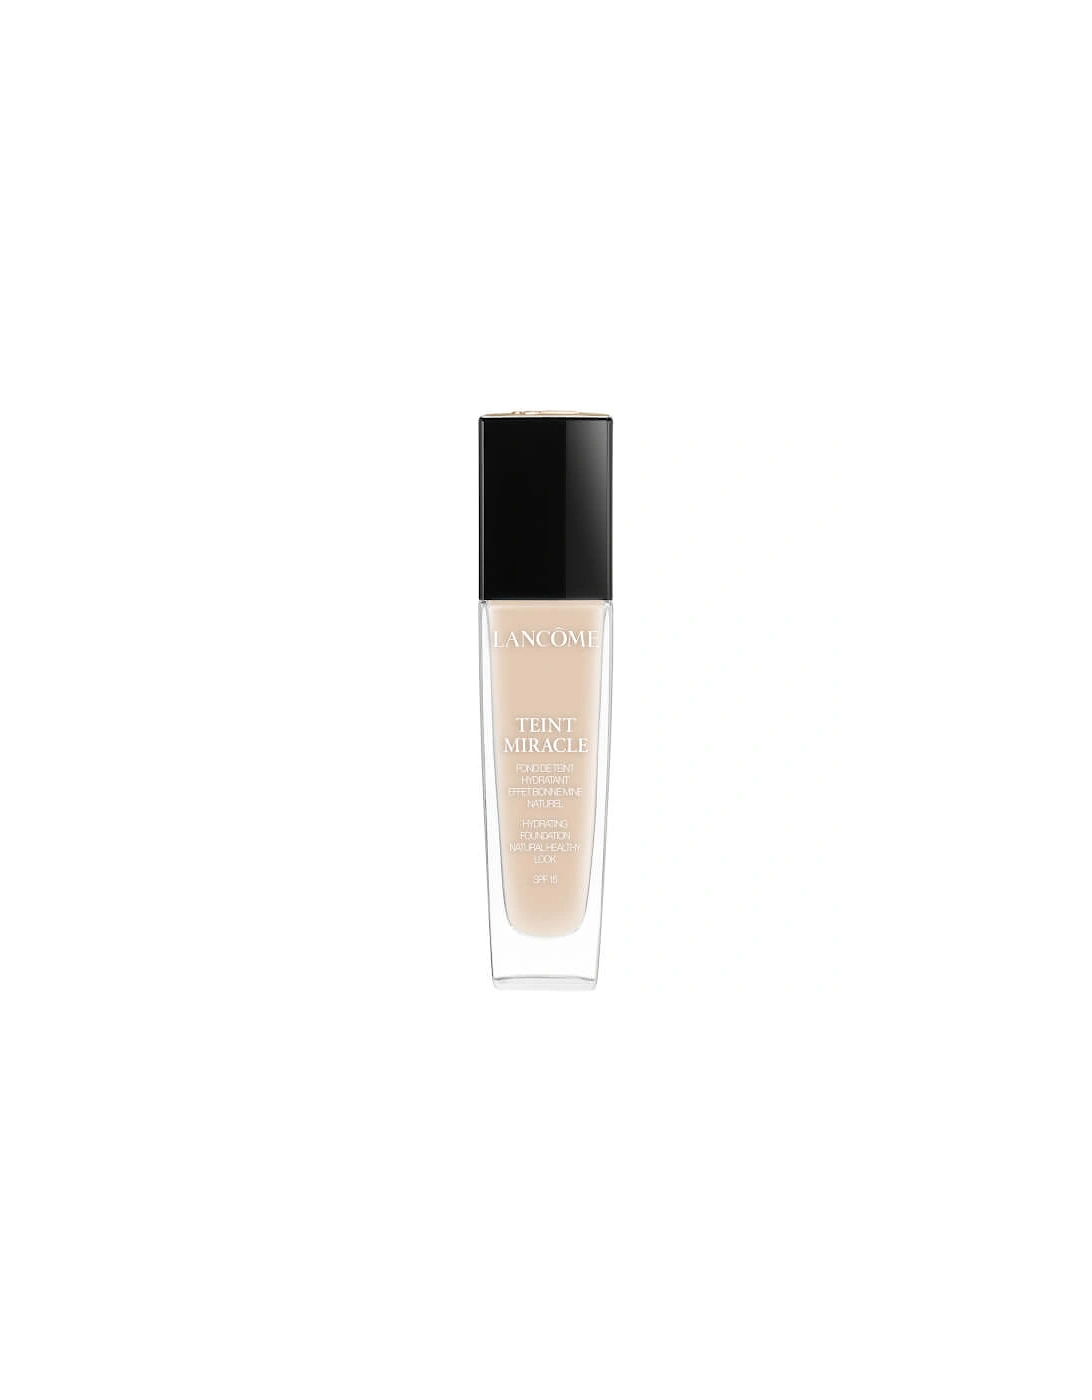 Teint Miracle Foundation SPF15 010 Beige Porcelaine, 2 of 1